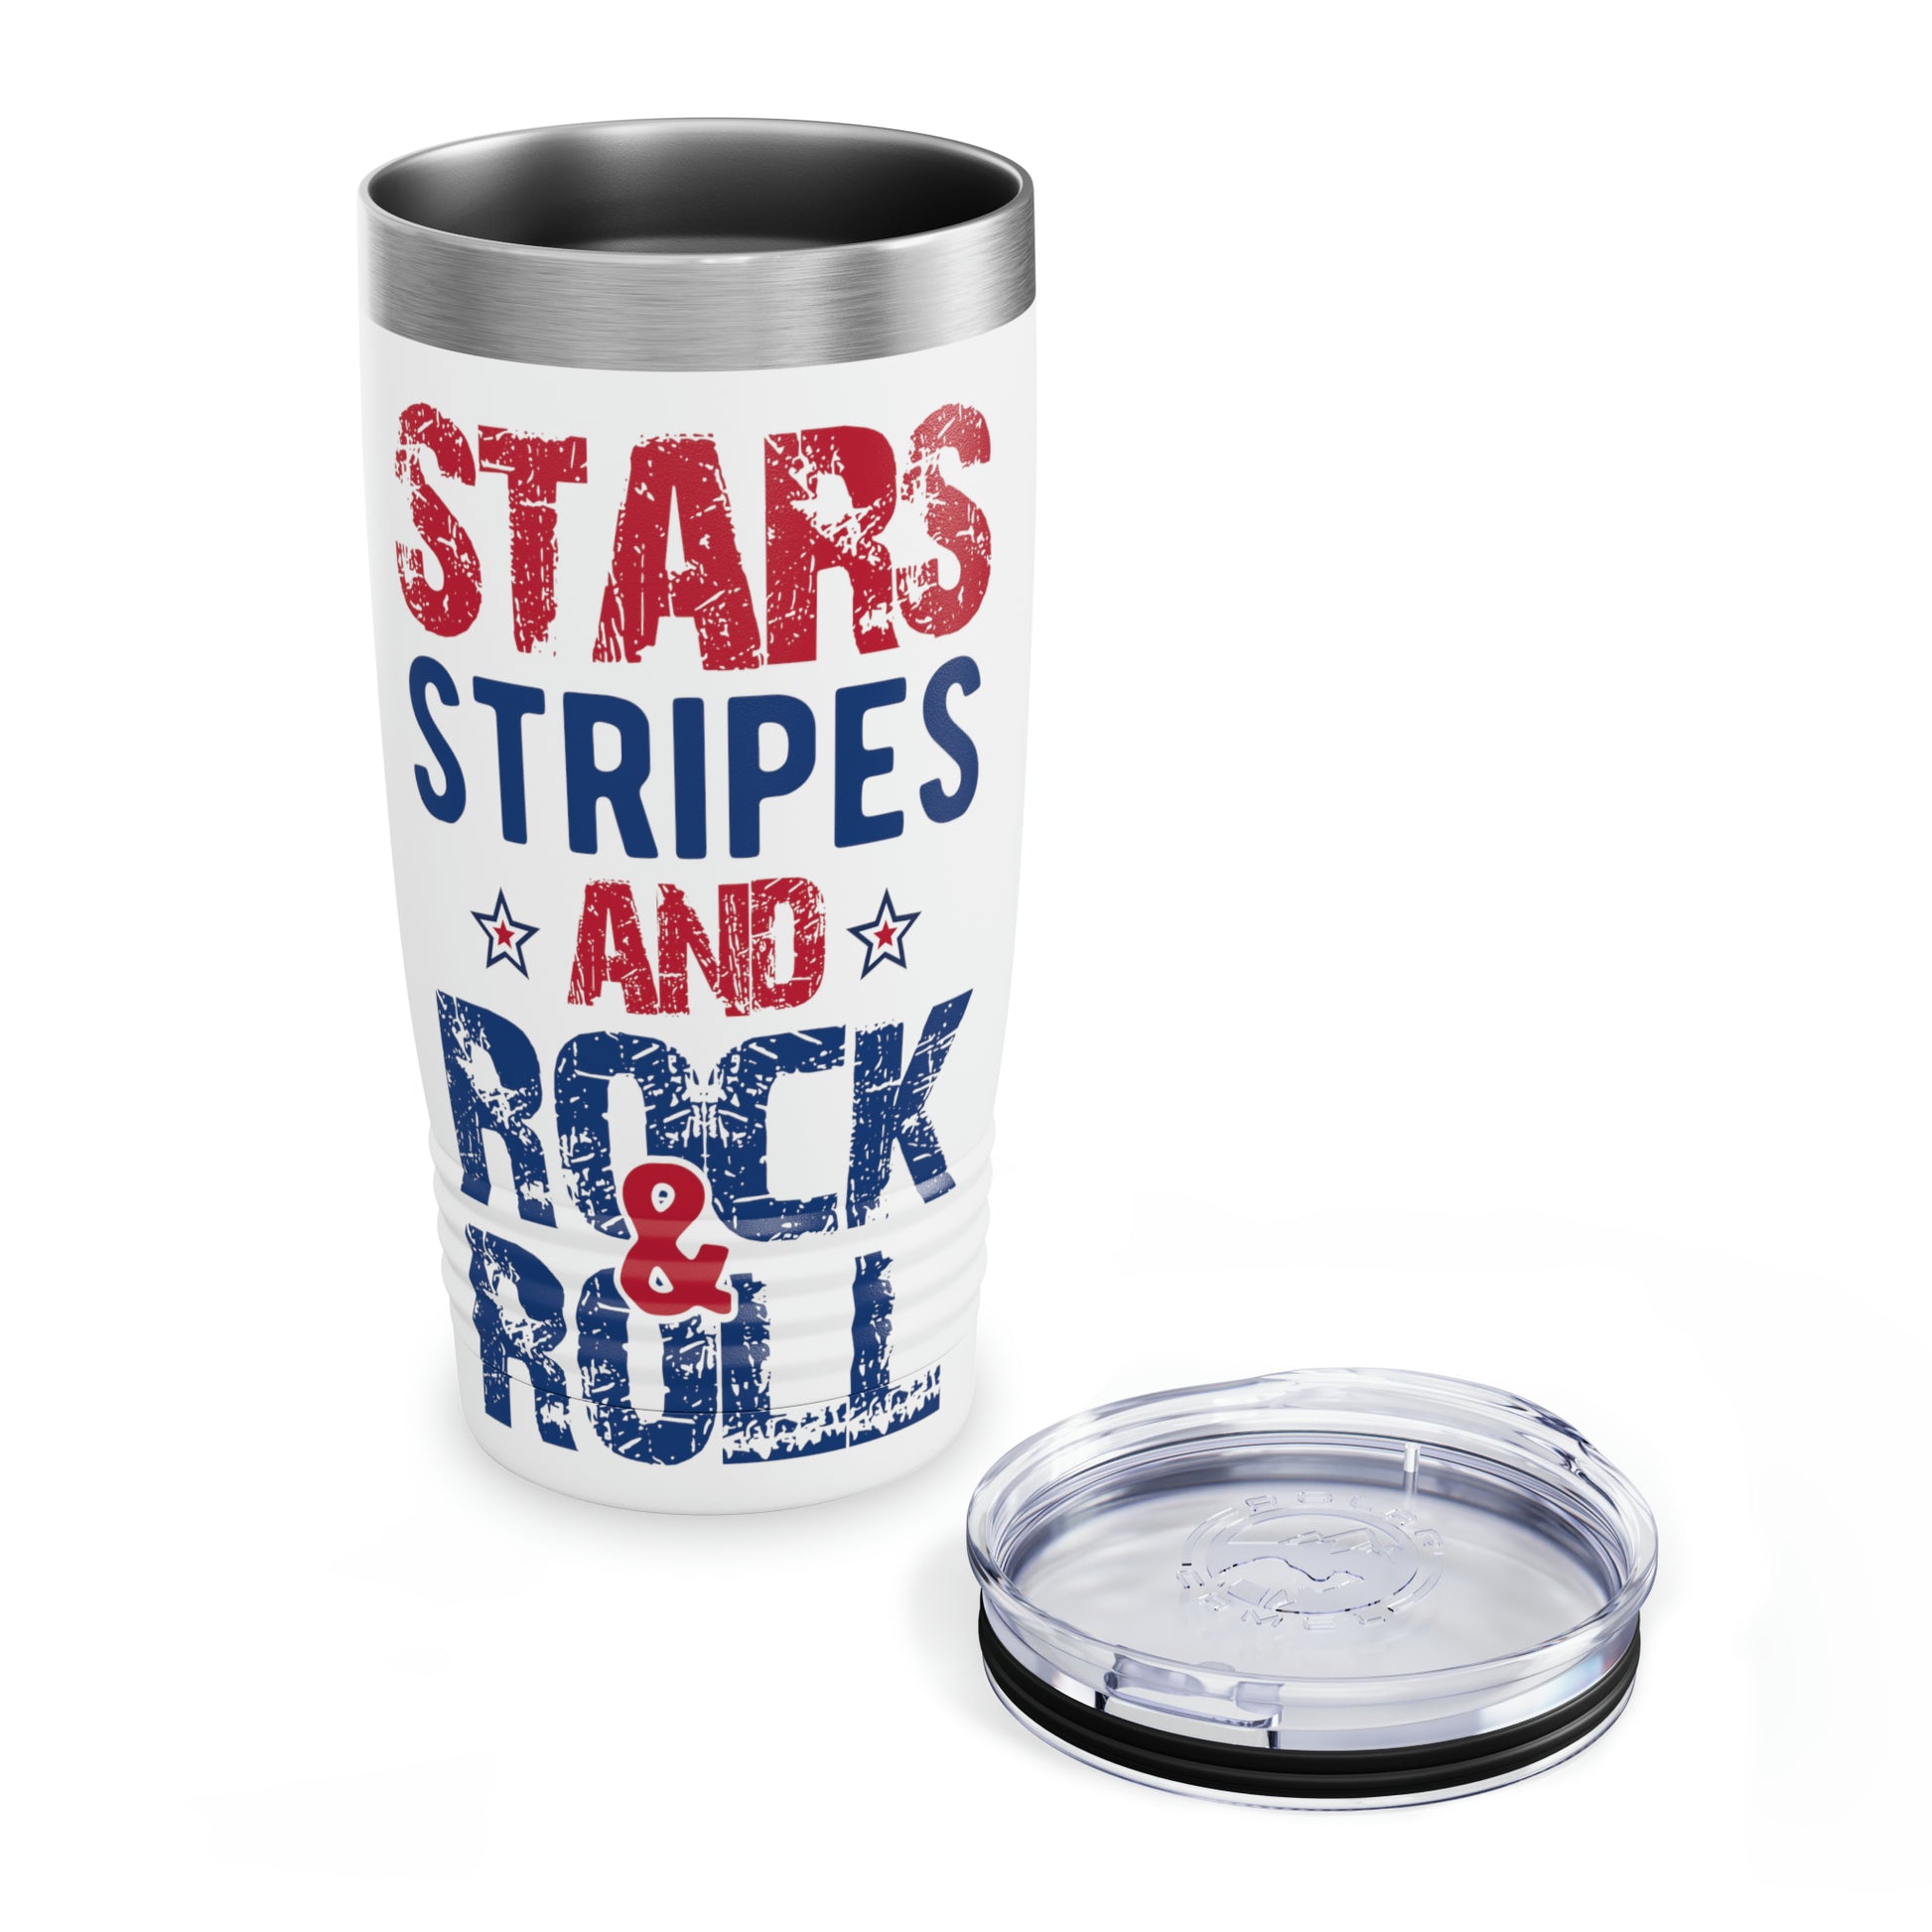 "Stars, Stripes And Rock & Roll" Tumbler - Weave Got Gifts - Unique Gifts You Won’t Find Anywhere Else!